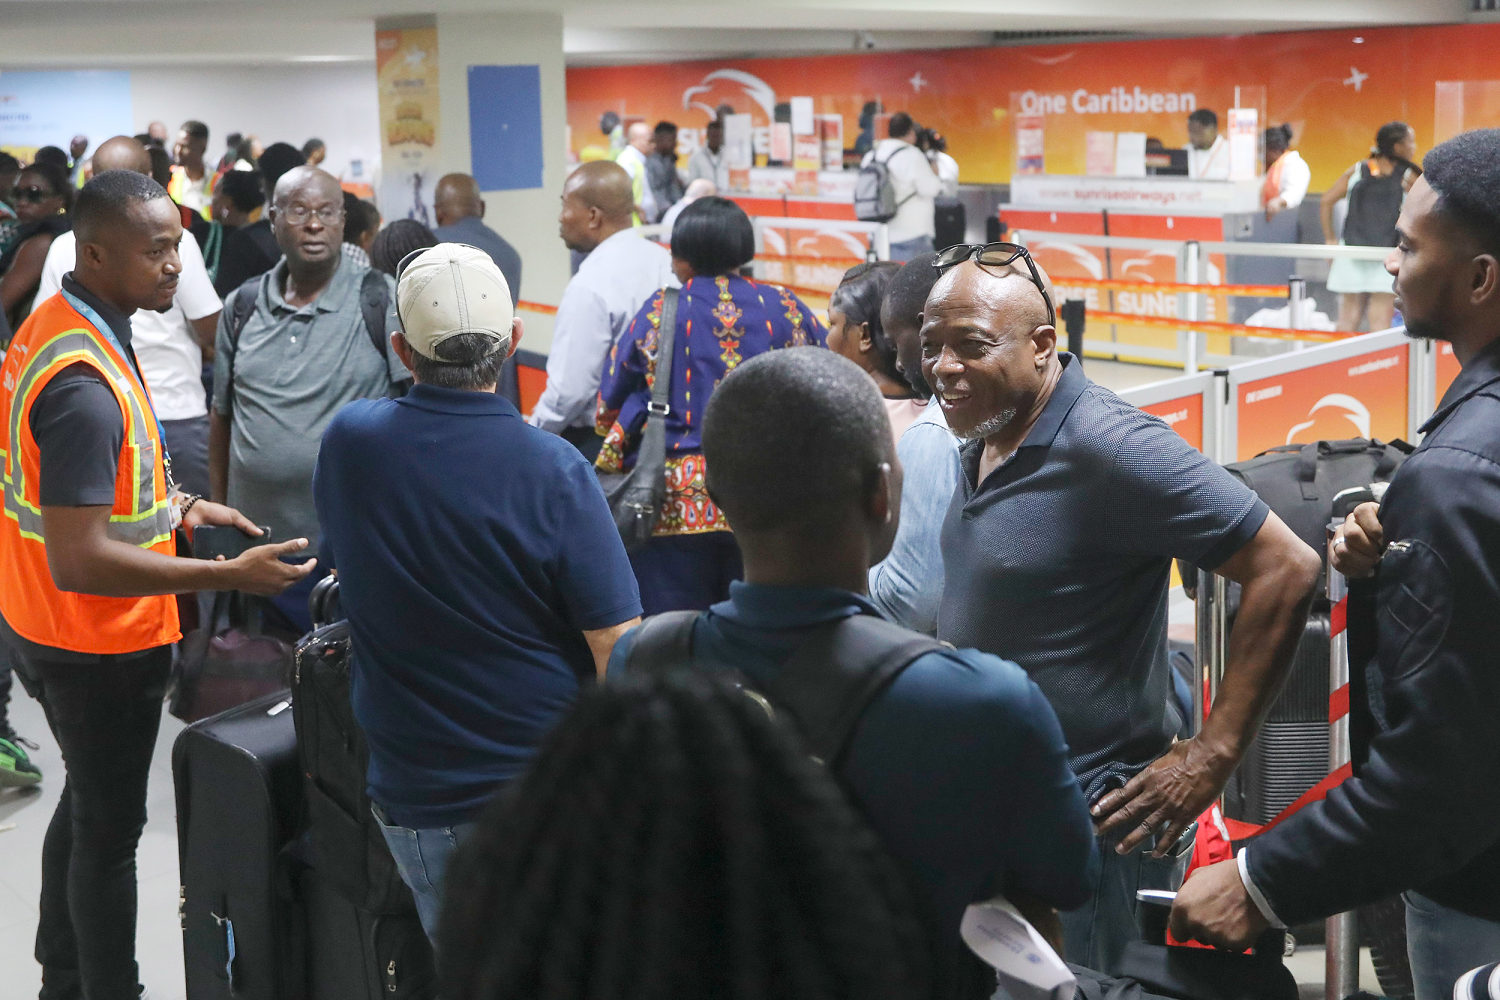 Haiti's main international airport reopens nearly three months after gang violence forced it closed